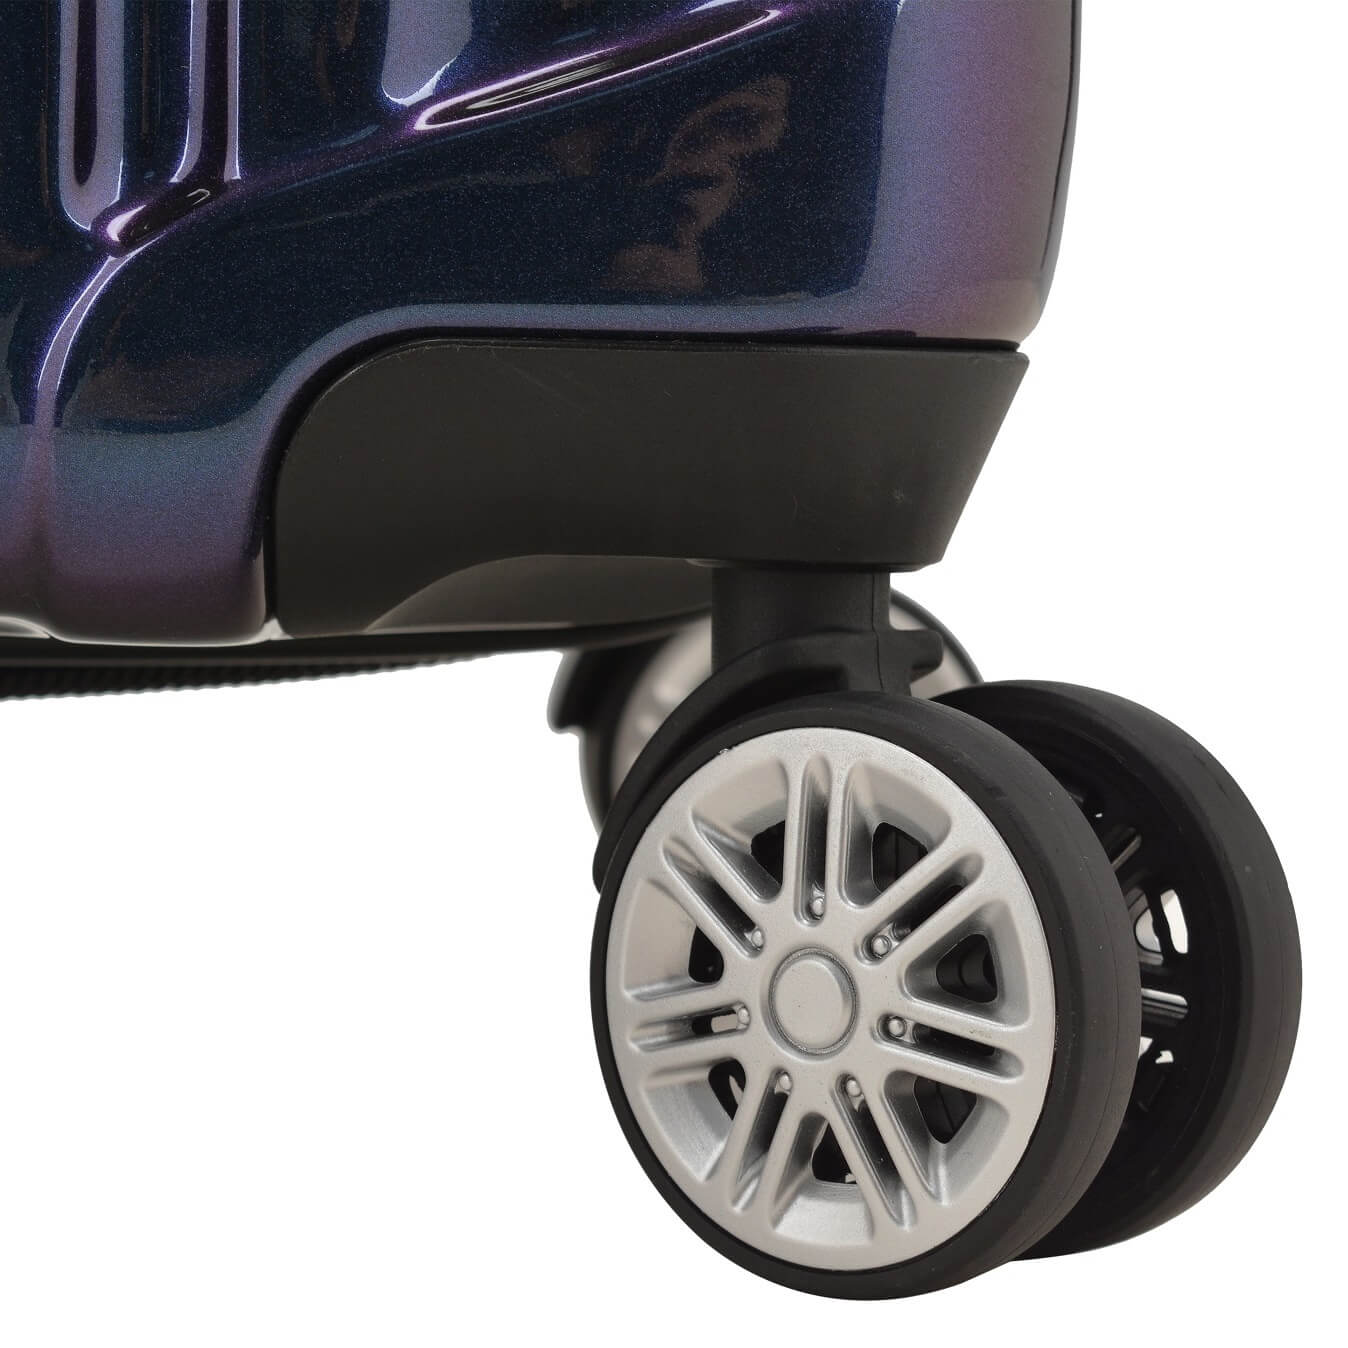 An image of a purple luggage with silver wheels.